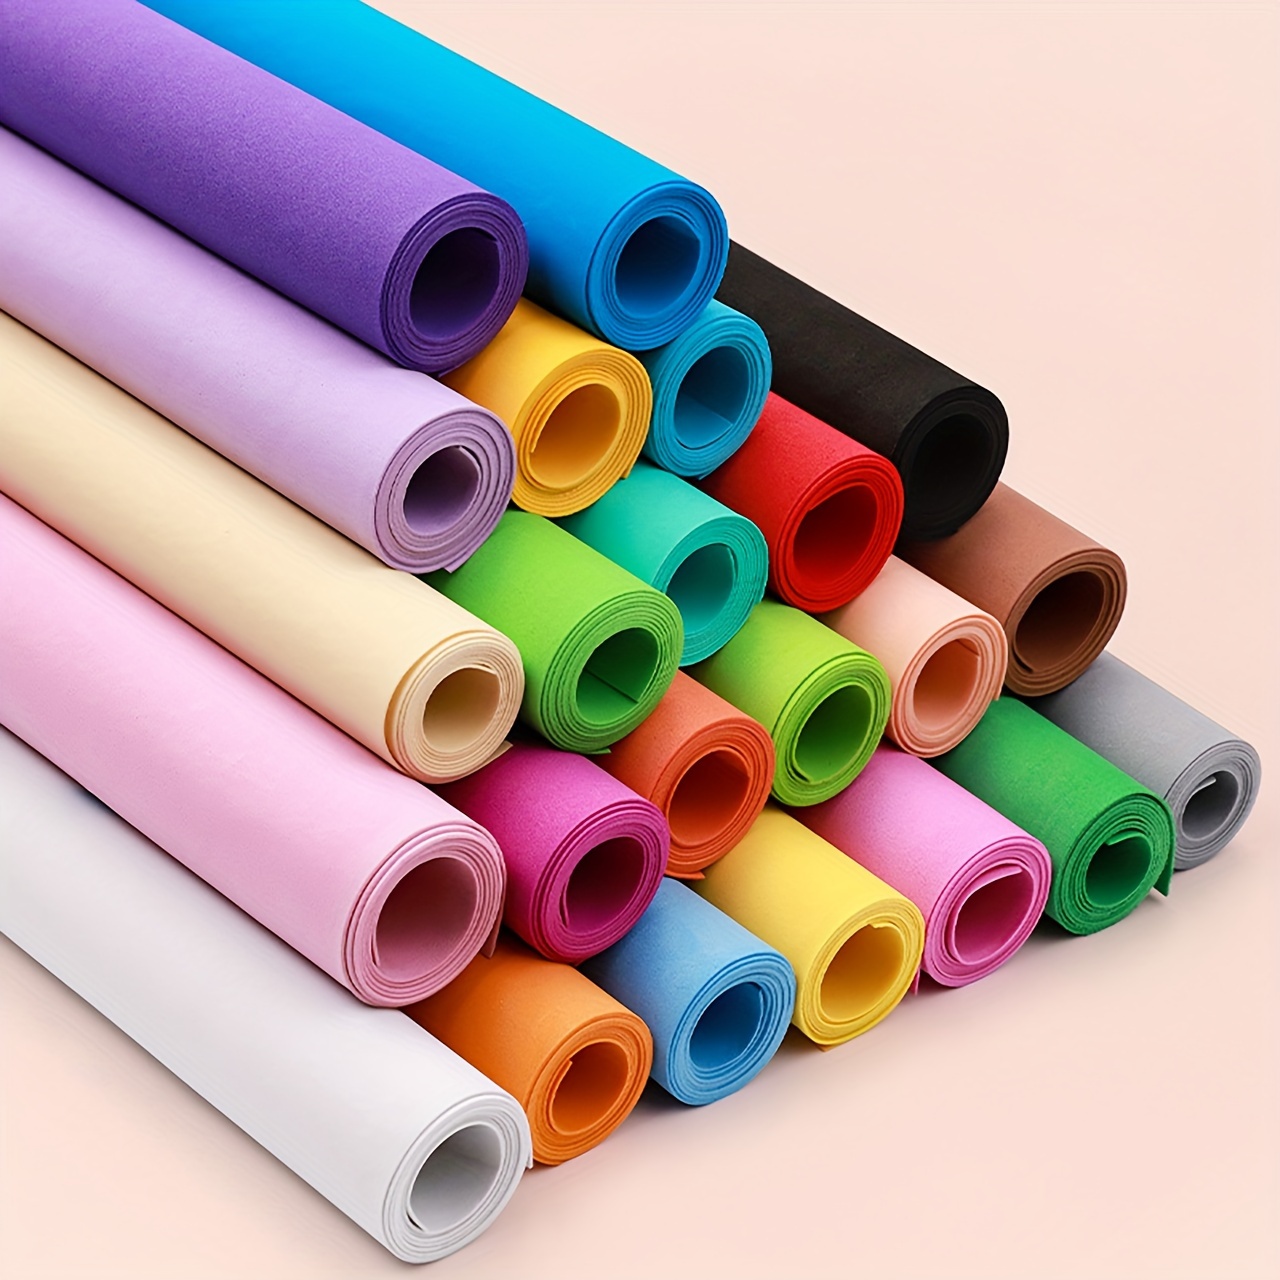 

1roll, 2mm Thickness, Eva Foam Sheets, Diy Material, 1500x330x2mm, 59.06x12.99x0.08in, Craft School Projects, Easy To Cut, Punch Handmade Material